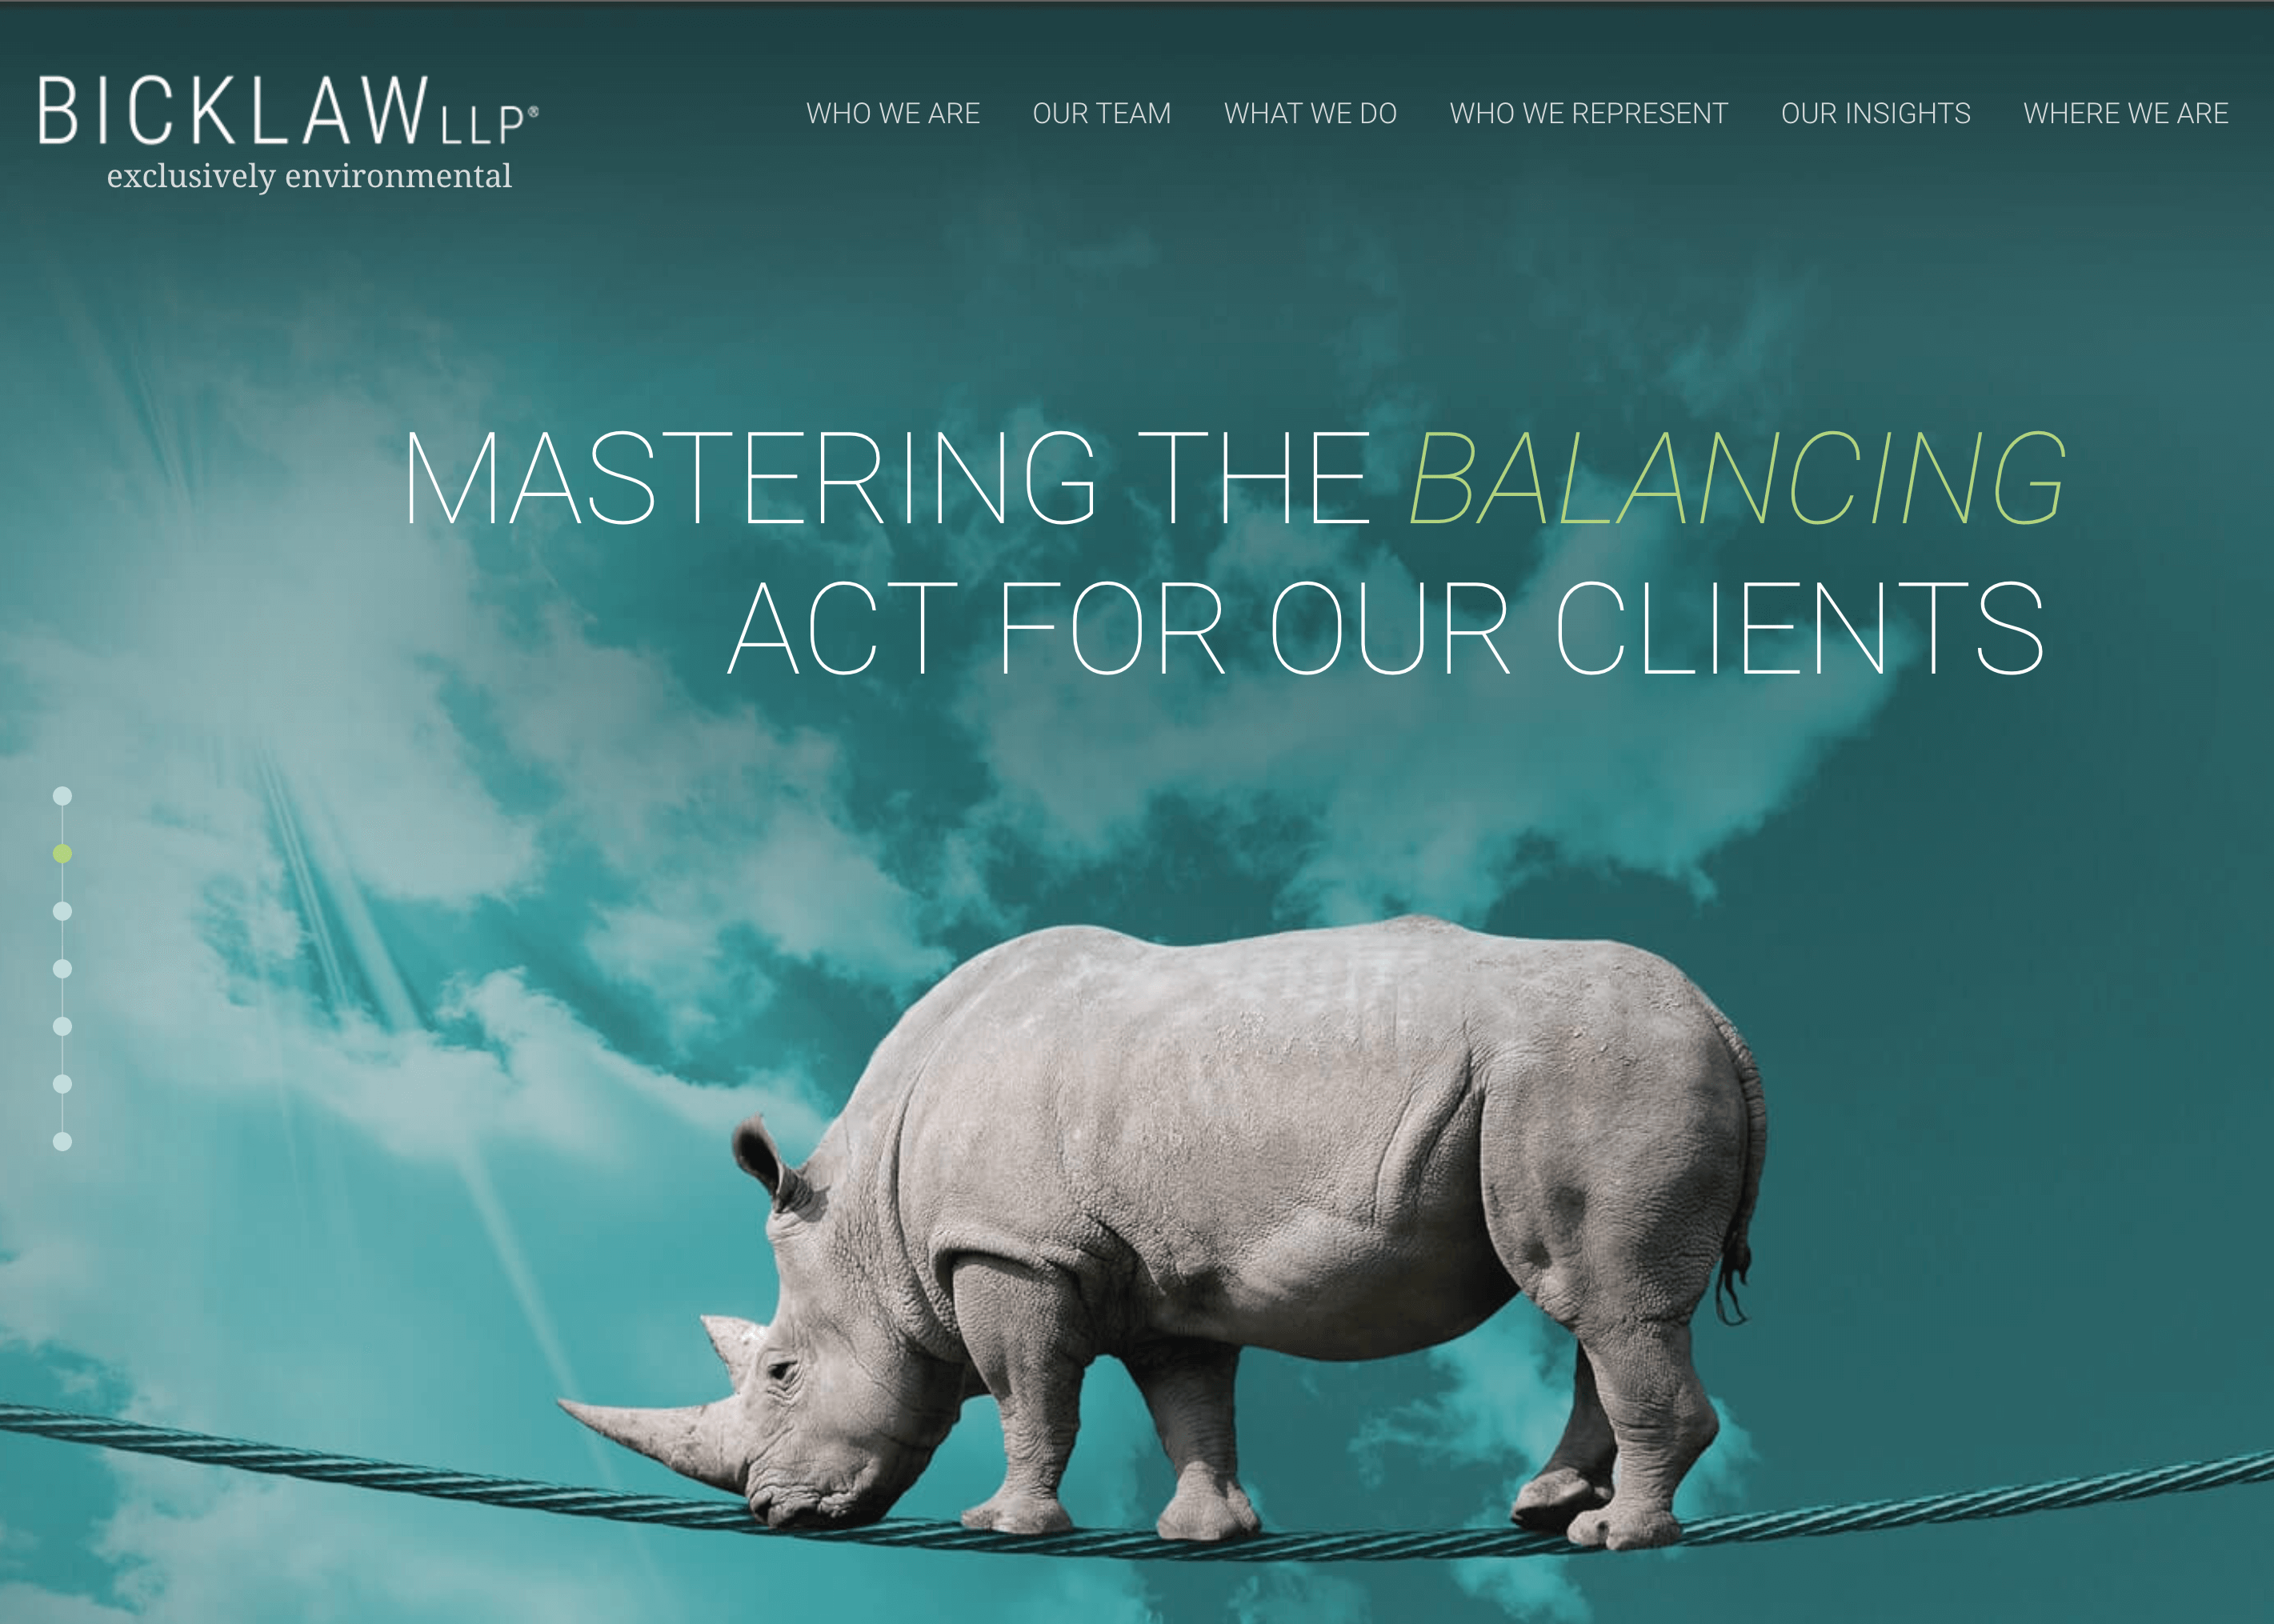 Bick Law's homepage feature the words "mastering the balancing act for our clients" over a picture of a Rhino photoshopped onto a tightrope. 